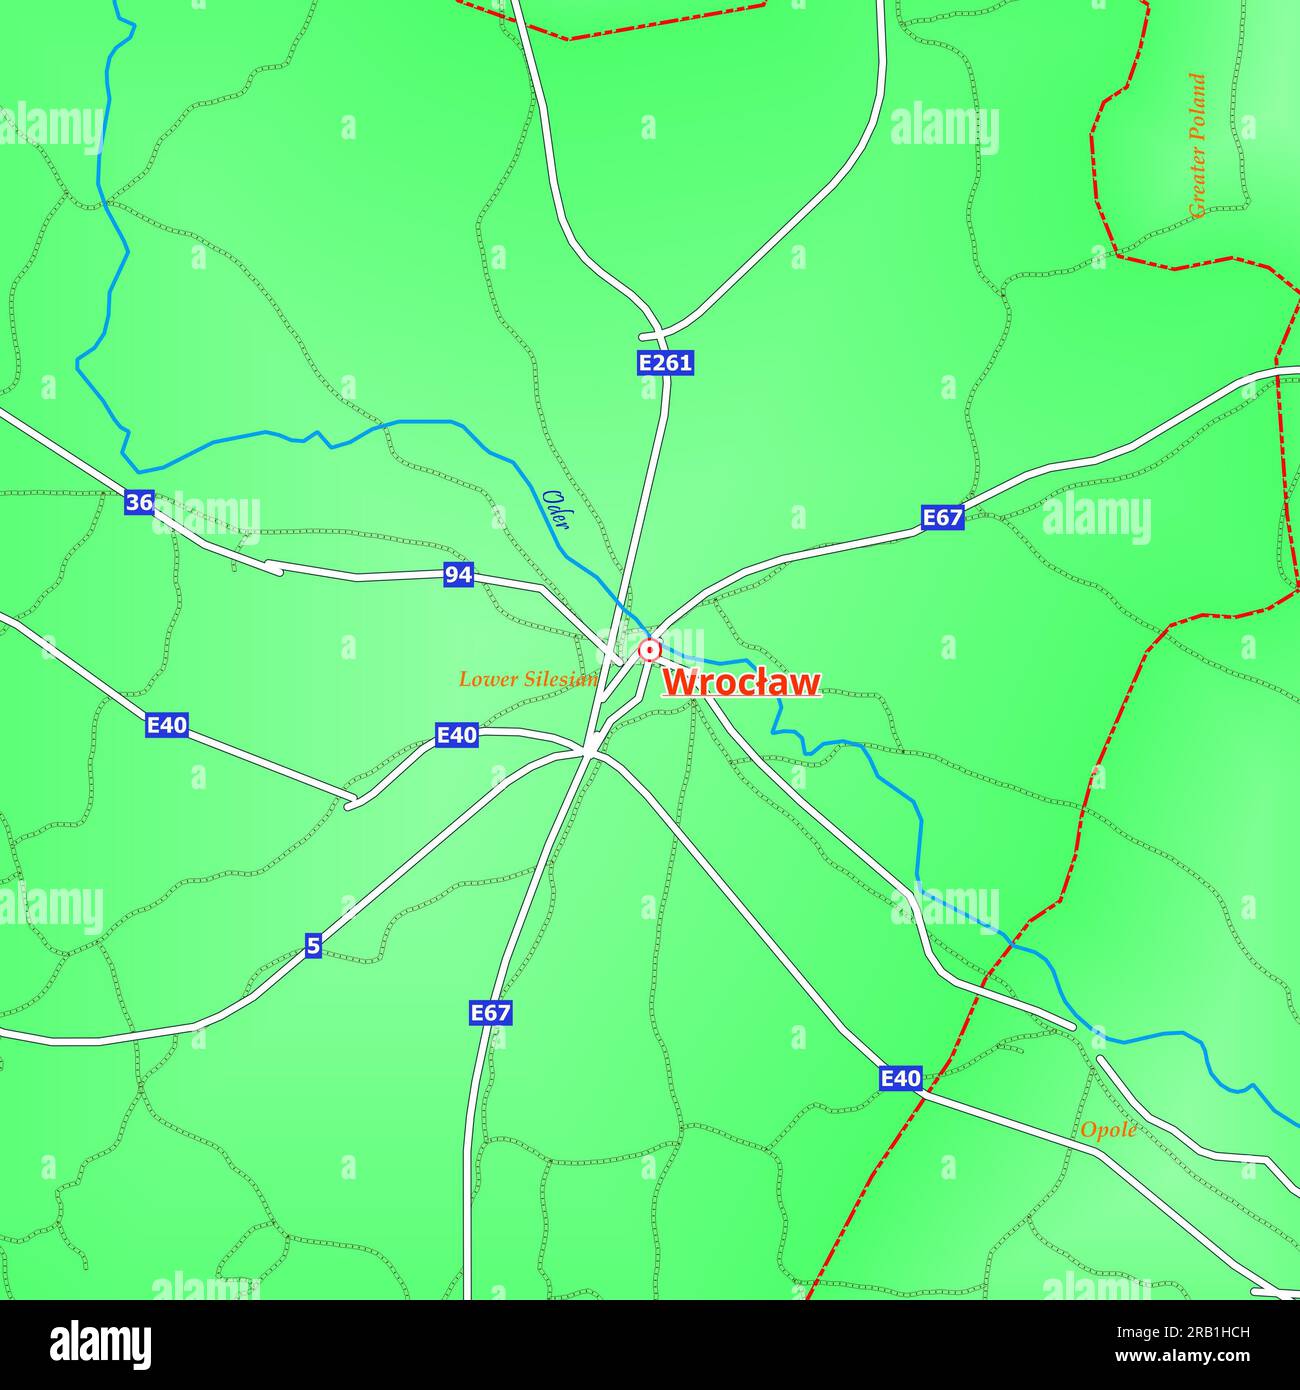 Map Of Wrocaw City In Poland 2RB1HCH 